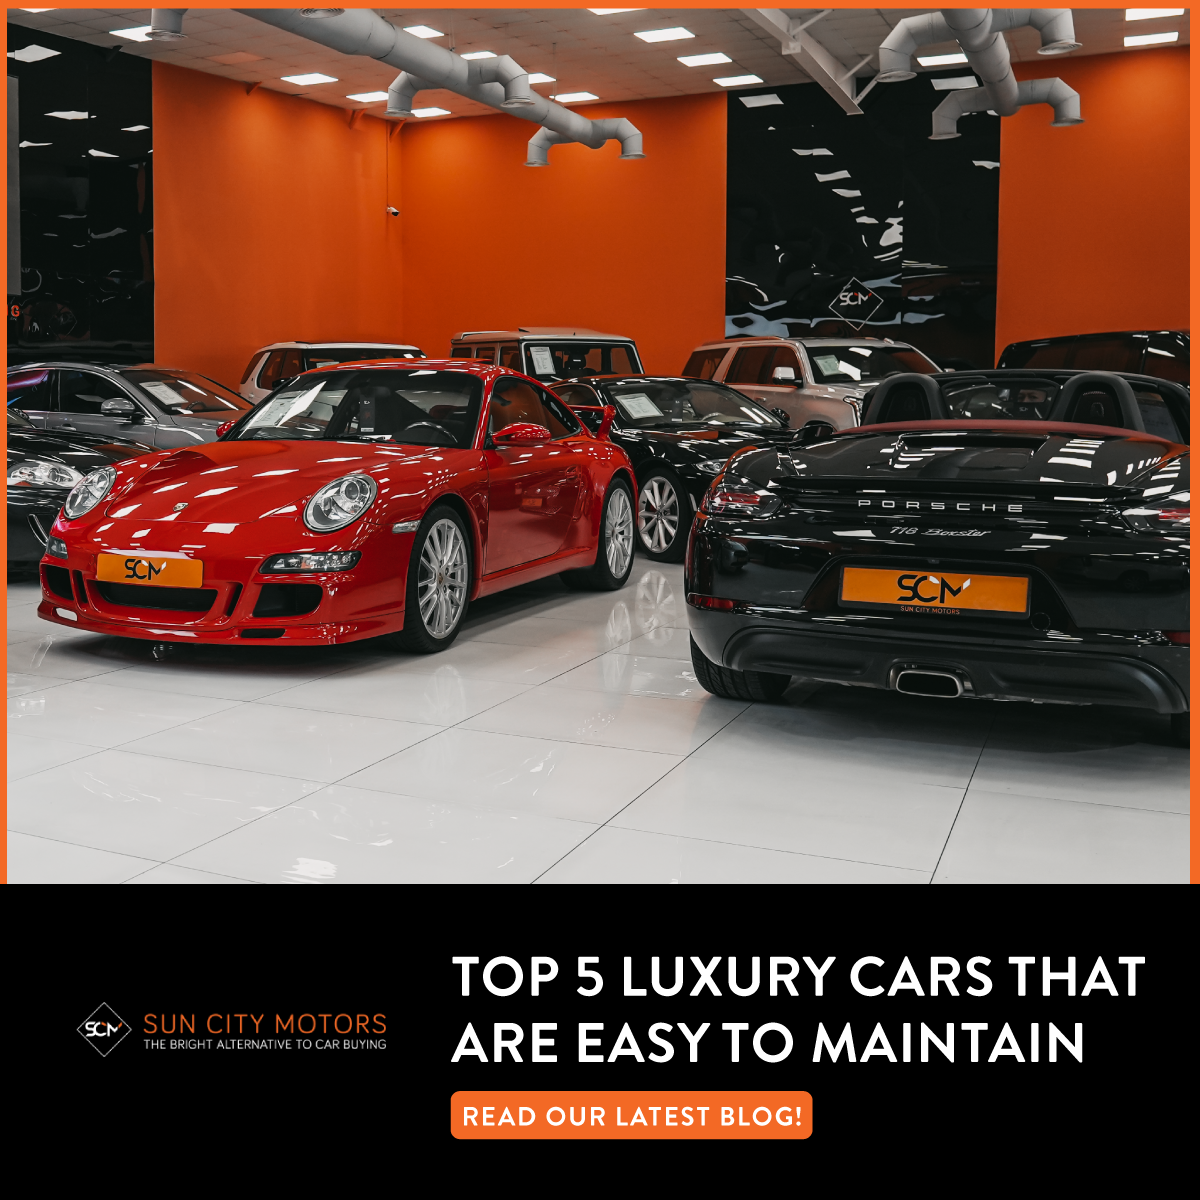 Top 5 Luxury Cars that are Easy to Maintain